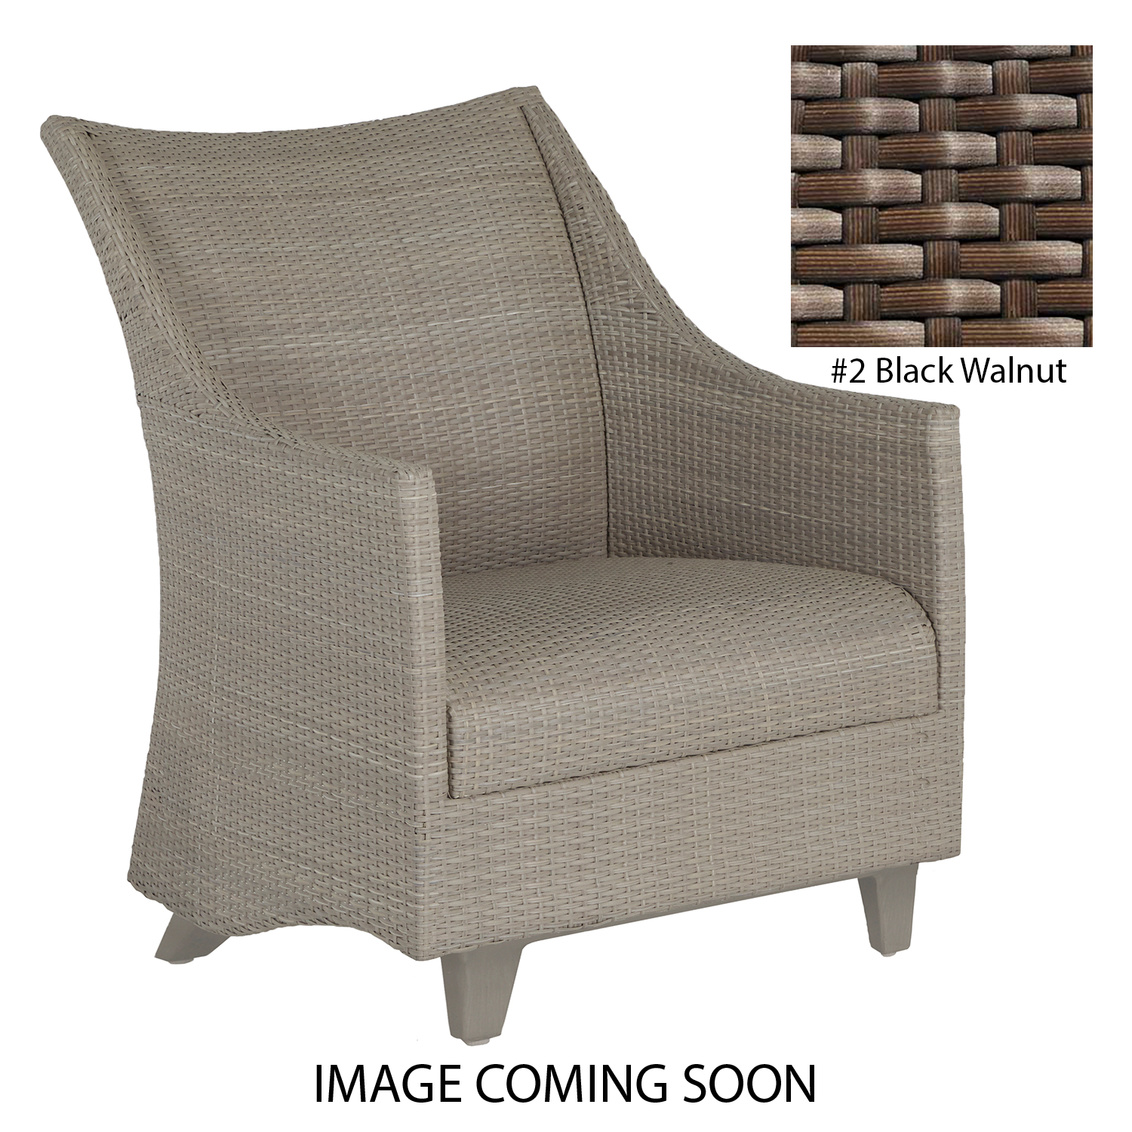 athena plus woven spring lounge in black walnut product image